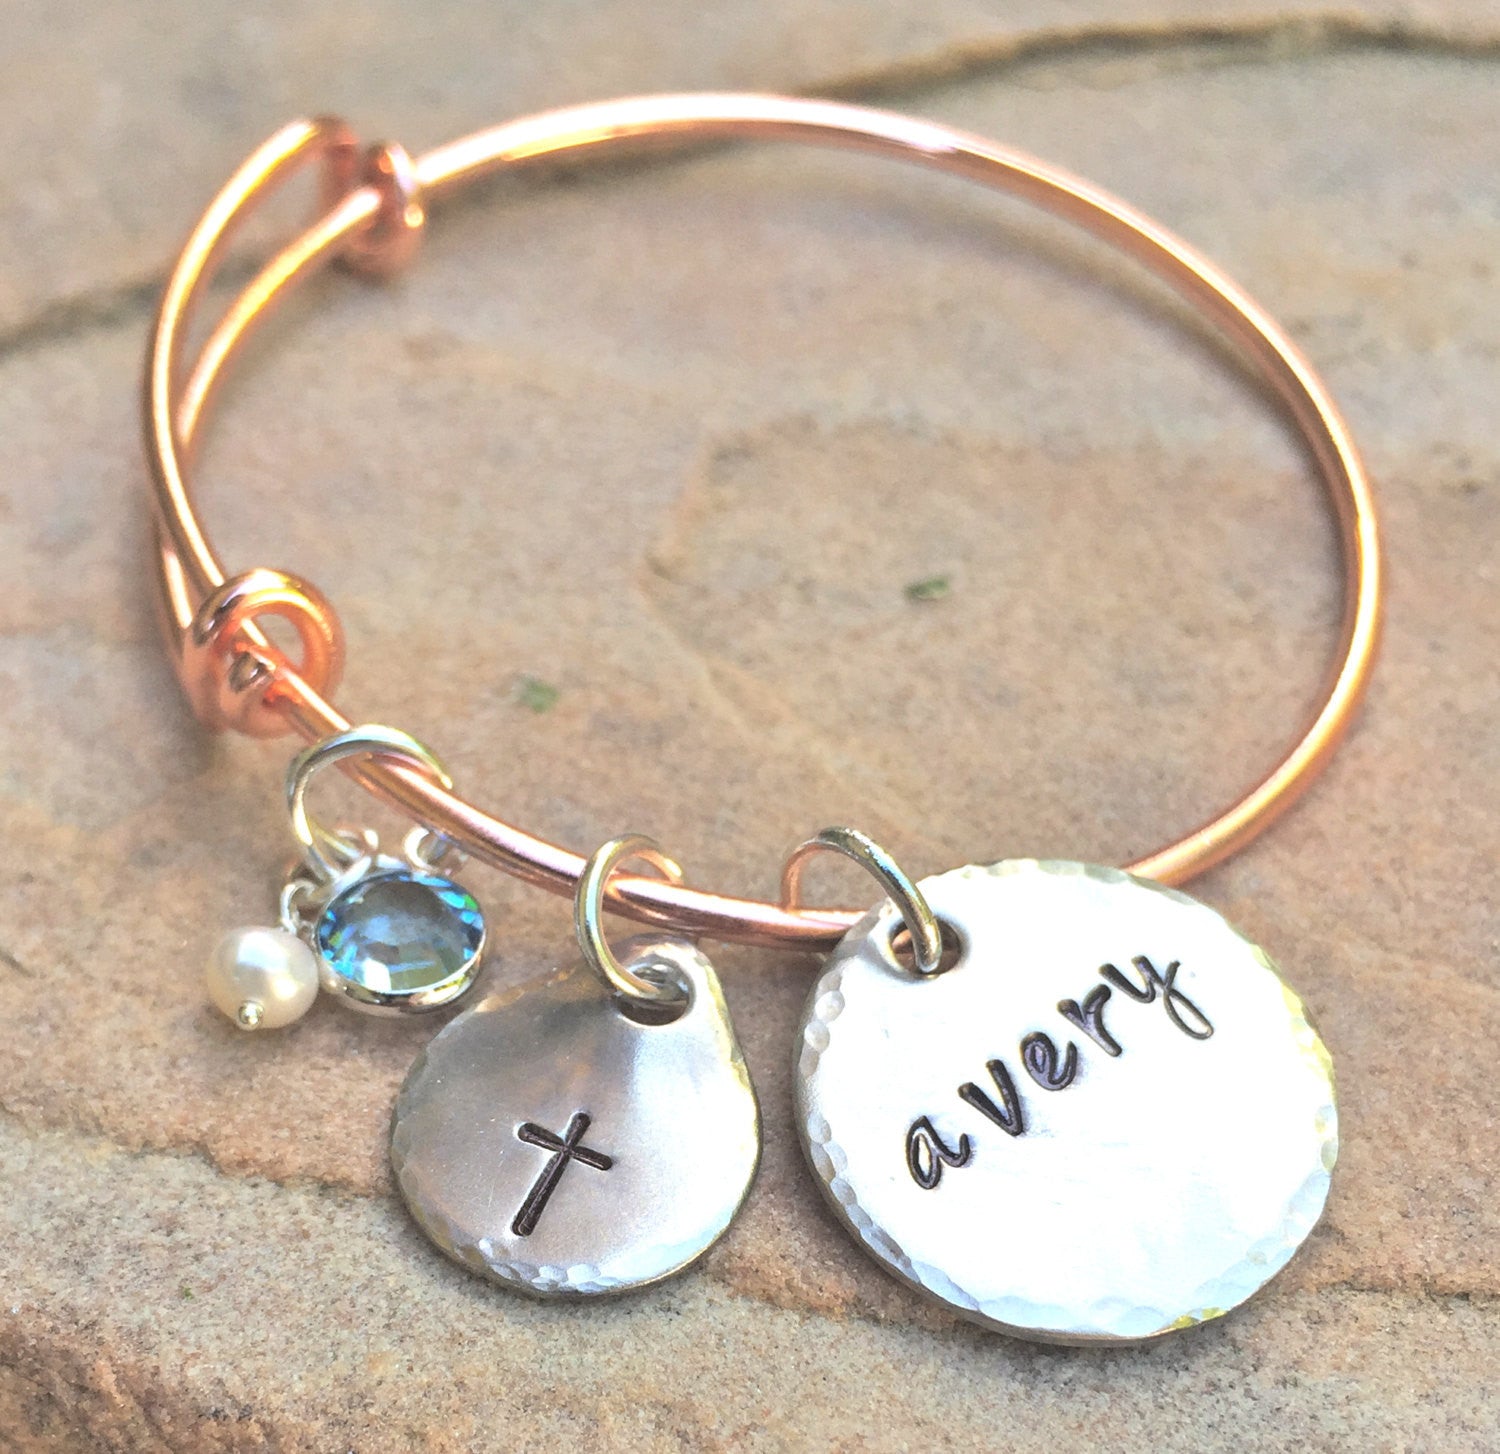 Children's Custom Bangle, Christian Gifts, Baptism Gift - Natashaaloha, jewelry, bracelets, necklace, keychains, fishing lures, gifts for men, charms, personalized, 